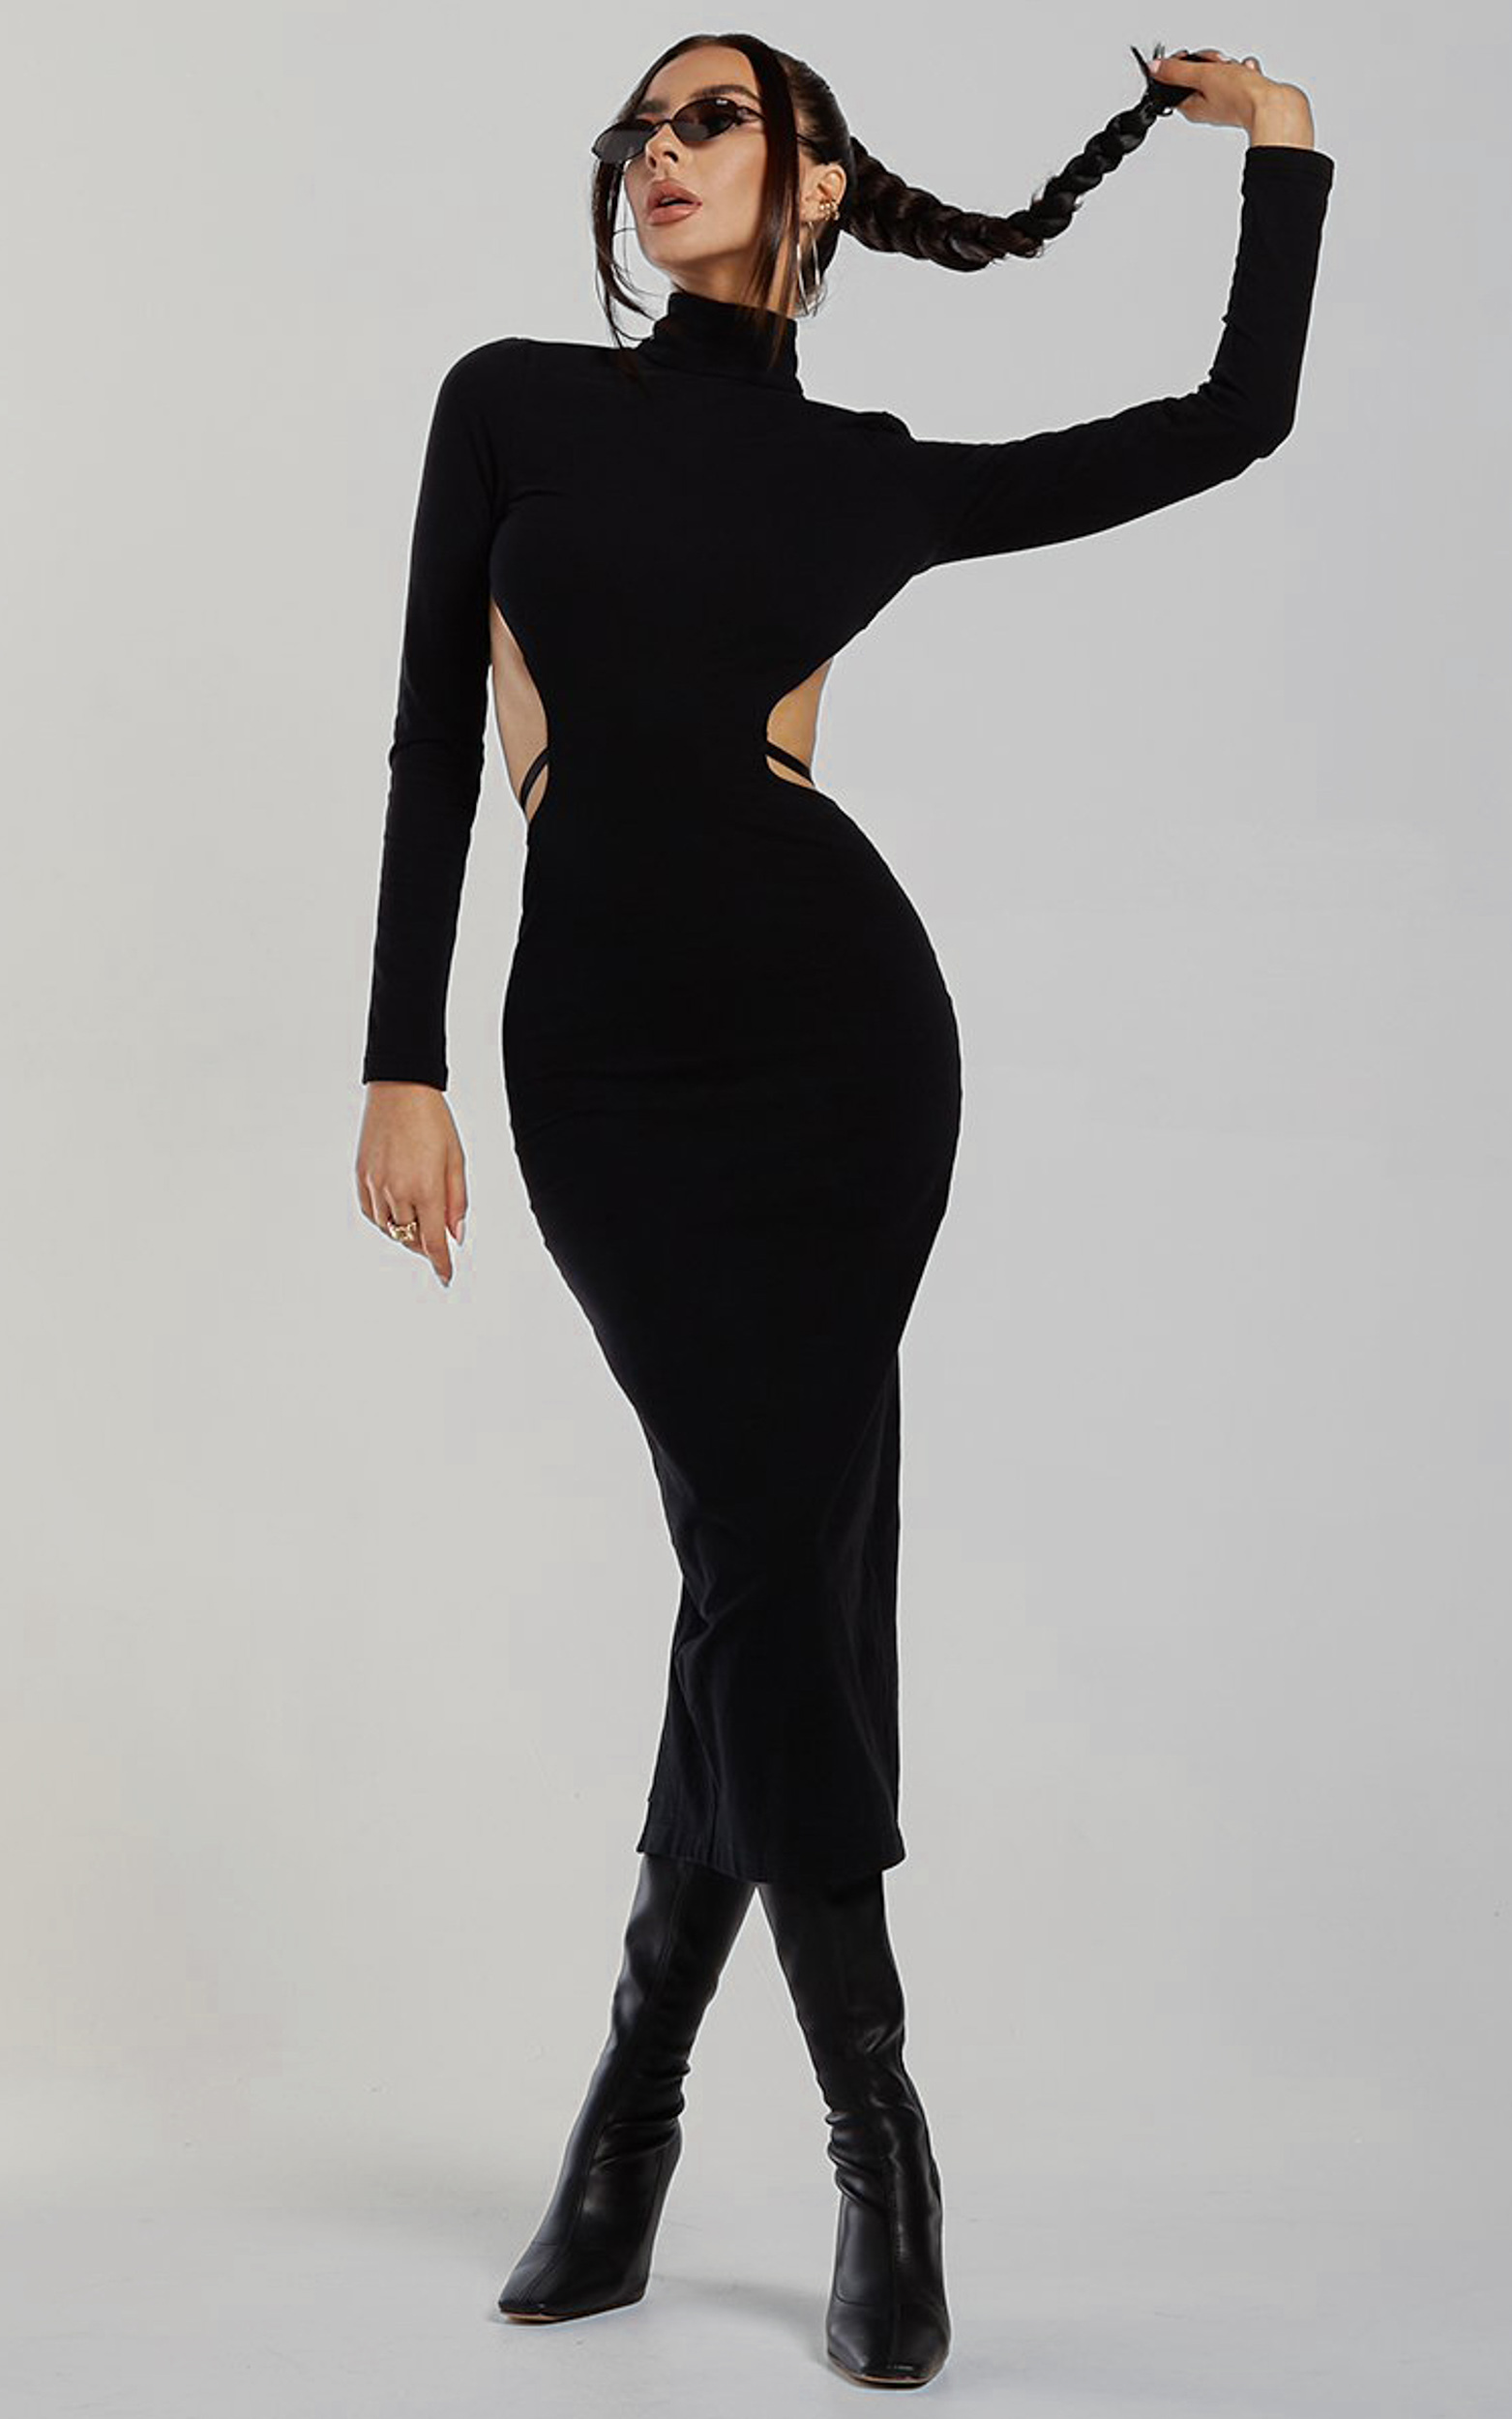 Runaway The Label - Valkyrie Dress in Black - L, BLK1, hi-res image number null